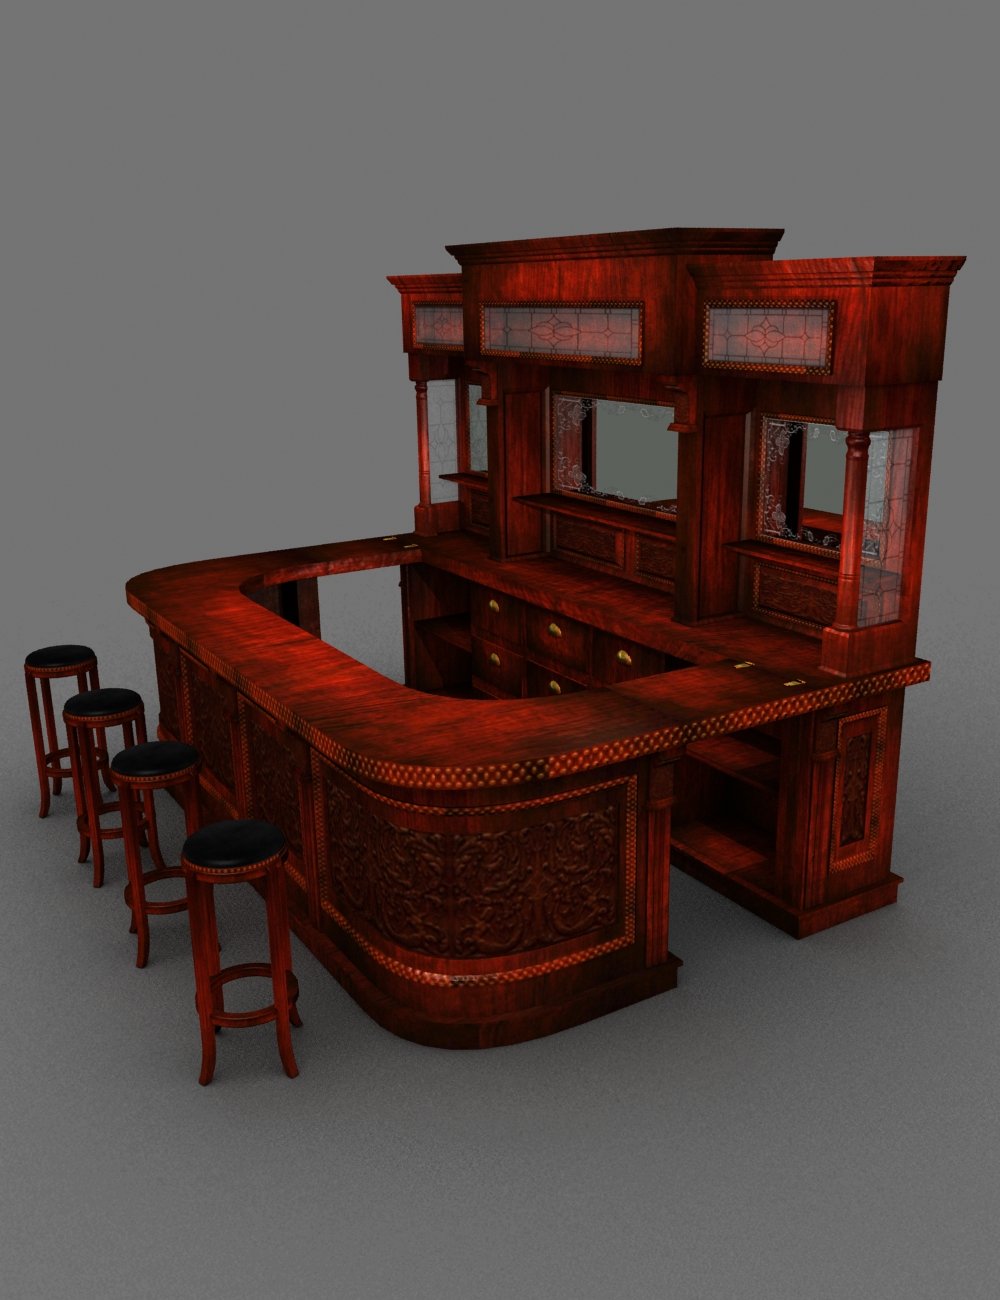 Saloon Bar by: hypnagogia, 3D Models by Daz 3D